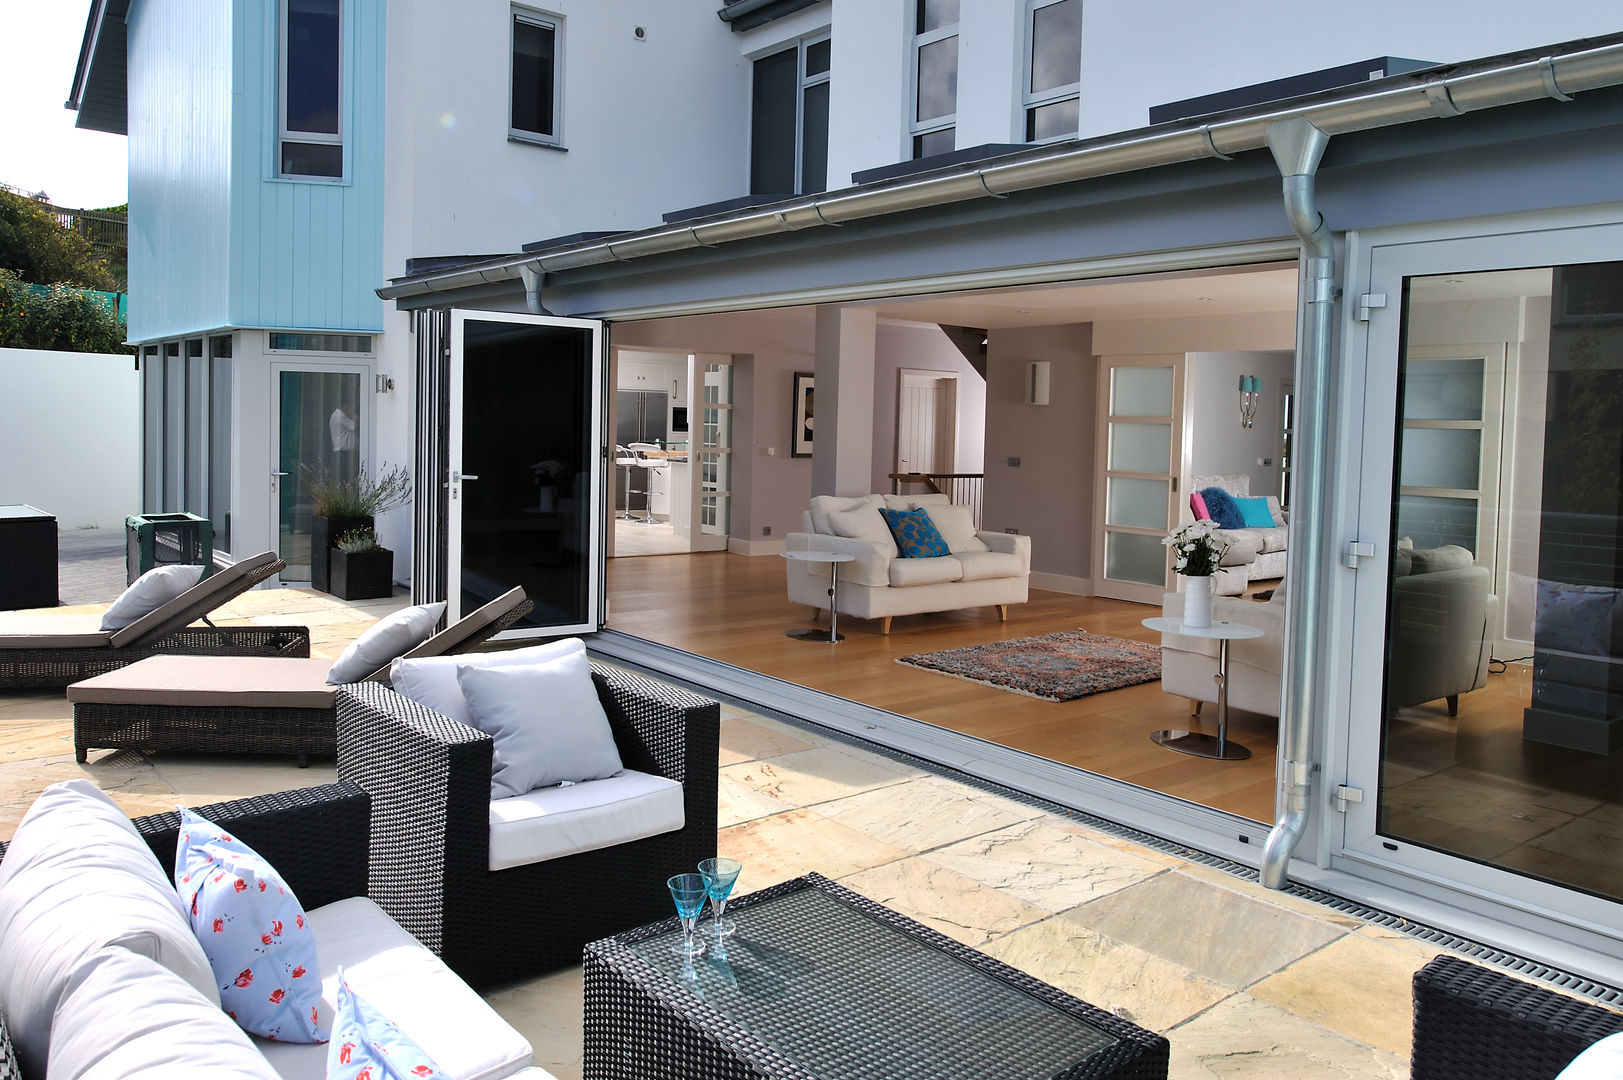 The Sea House, Porth, Cornwall homify Patios